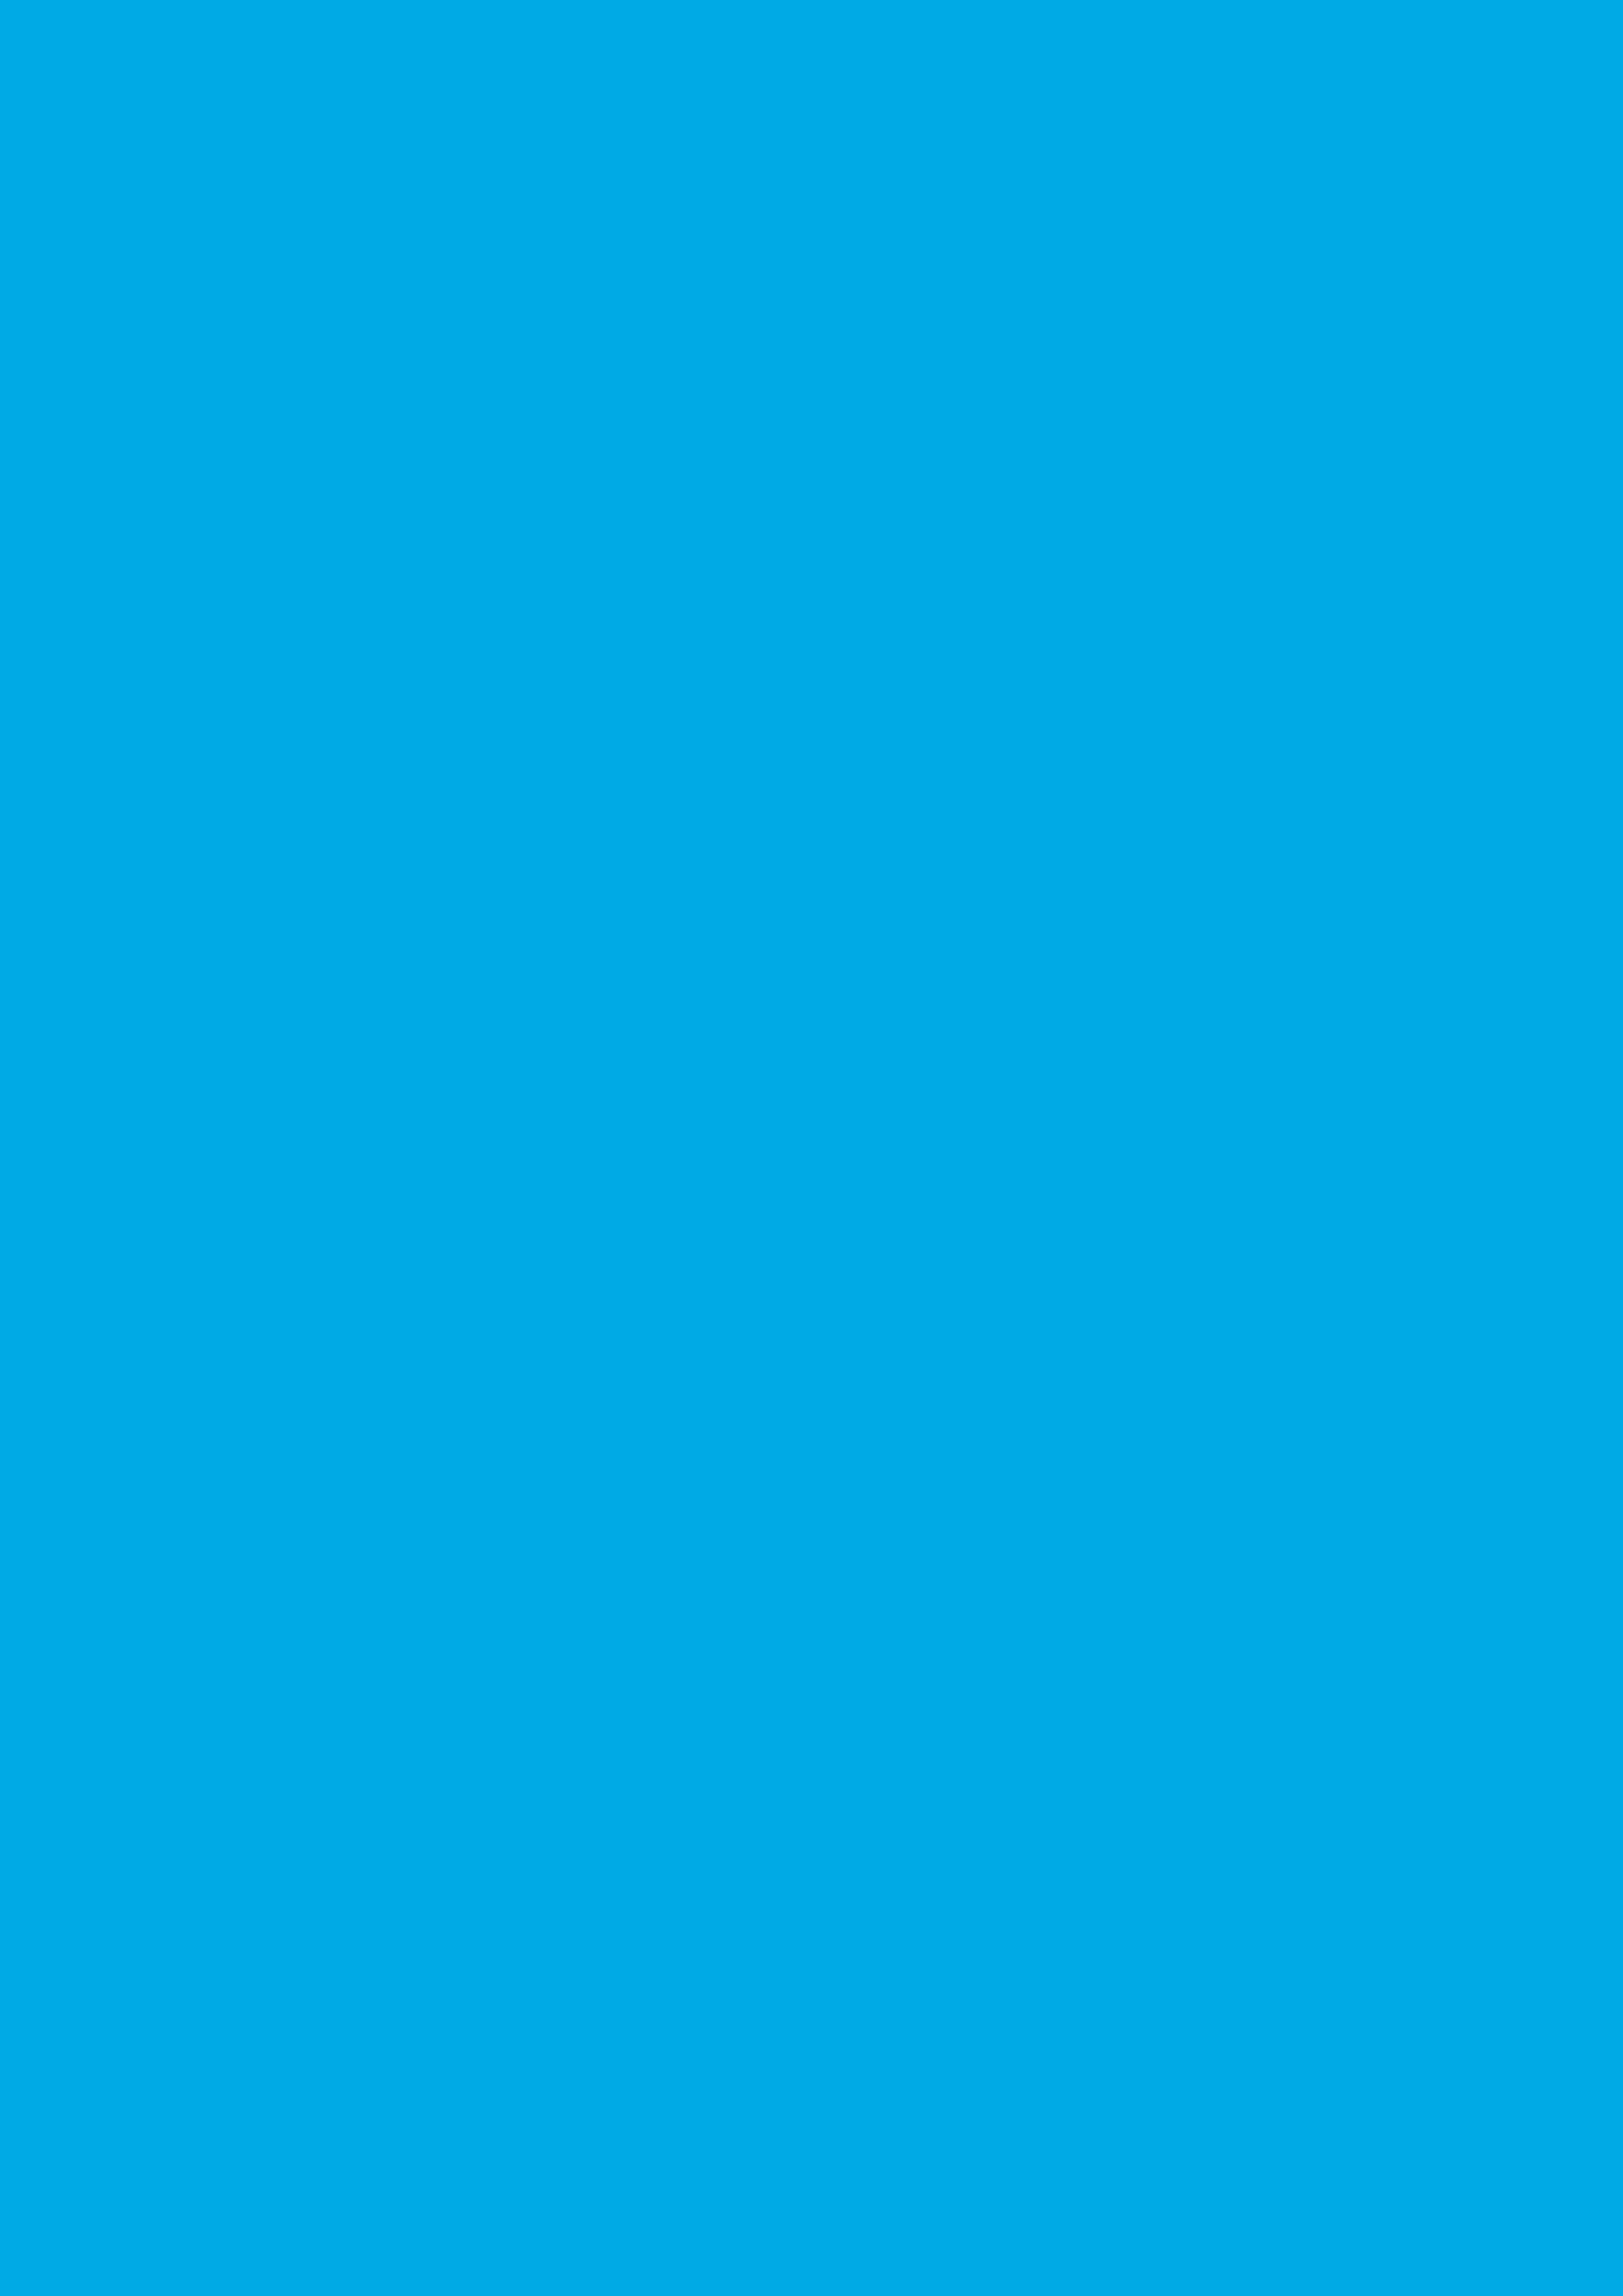 2480x3508 Spanish Sky Blue Solid Color Background